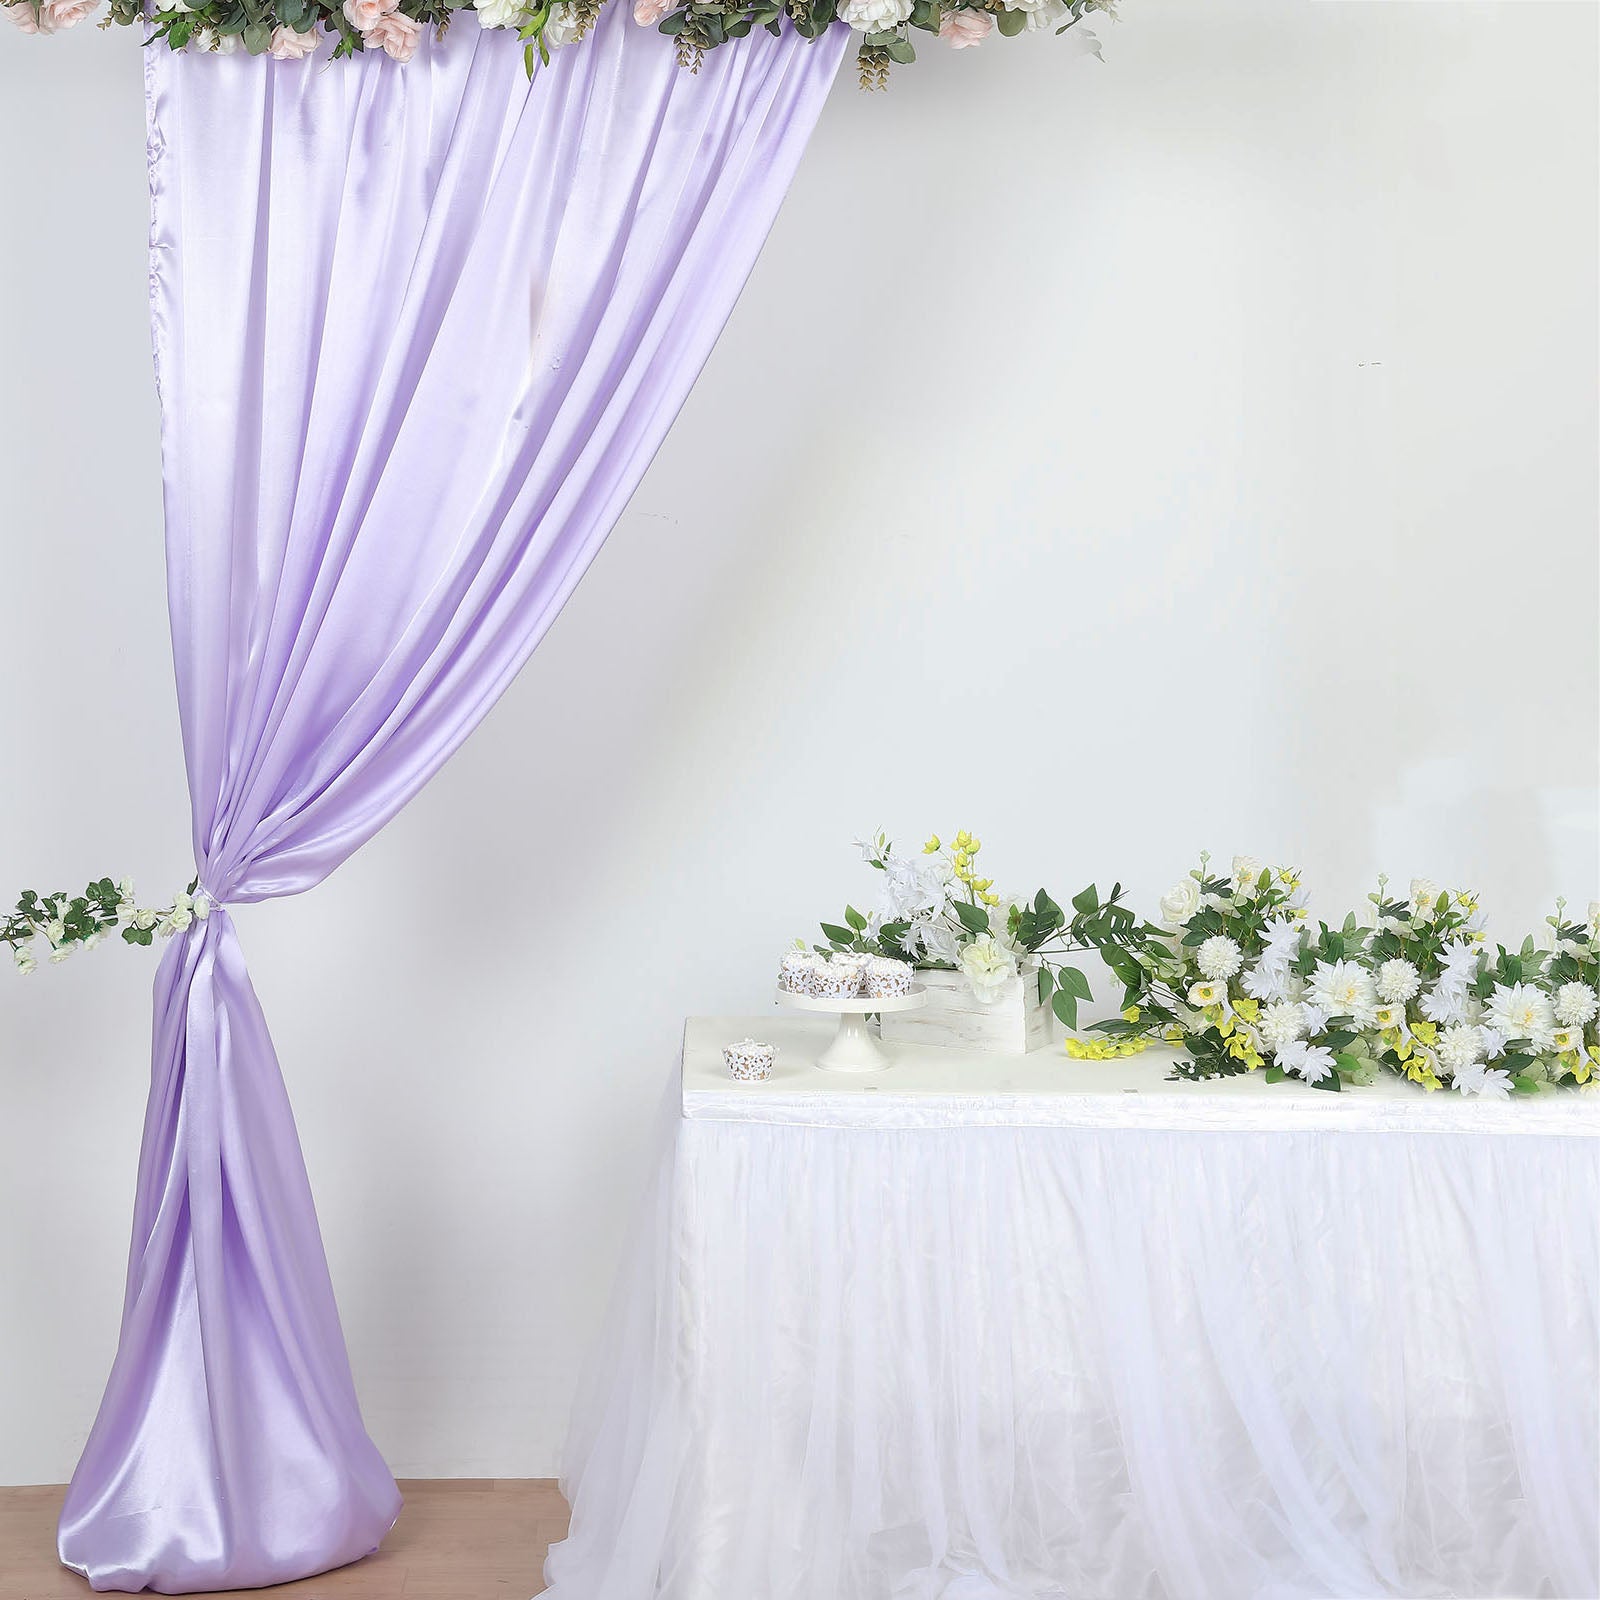  Purple Tulle Backdrop Curtains for Baby Shower Party